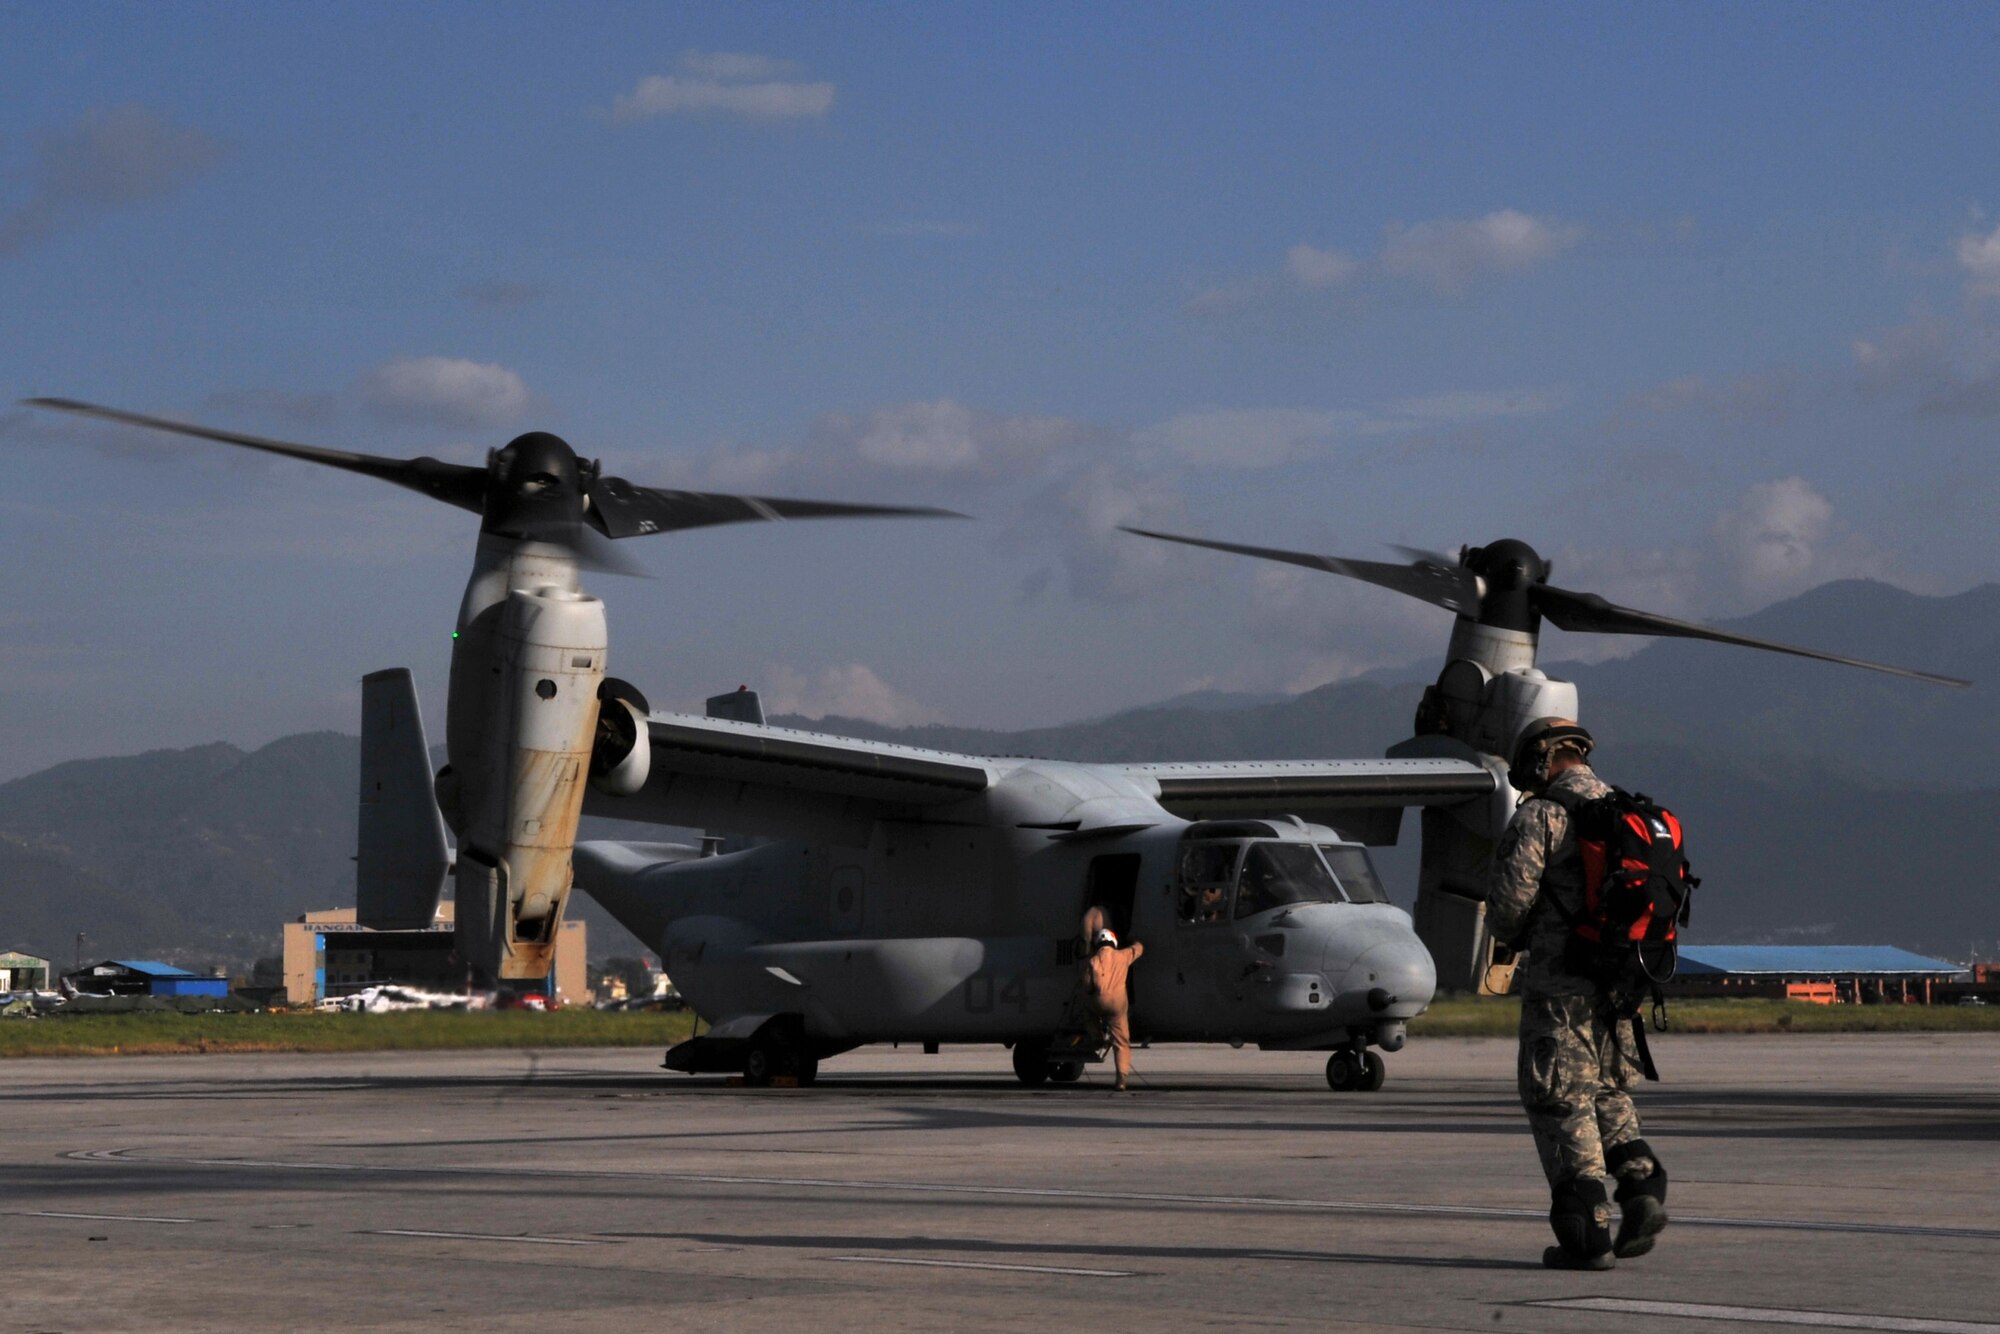 U.S. Air Force Master Sgt. Joe Damian, 36th Contingency Response Group independent duty medical technician-paramedic, walks to a U.S. Marine Corps MV-22 Osprey for a casualty evacuation mission at the Tribhuvan International Airport in Kathmandu, Nepal, May 14, 2015. Damian flew on nine sorties in three days with the Marines in support of Operation Sahayogi Haat and transported a total of six patients following the second earthquake the struck Nepal May 12, 2015. (U.S. Air Force photo by Staff Sgt. Melissa B. White/Released)